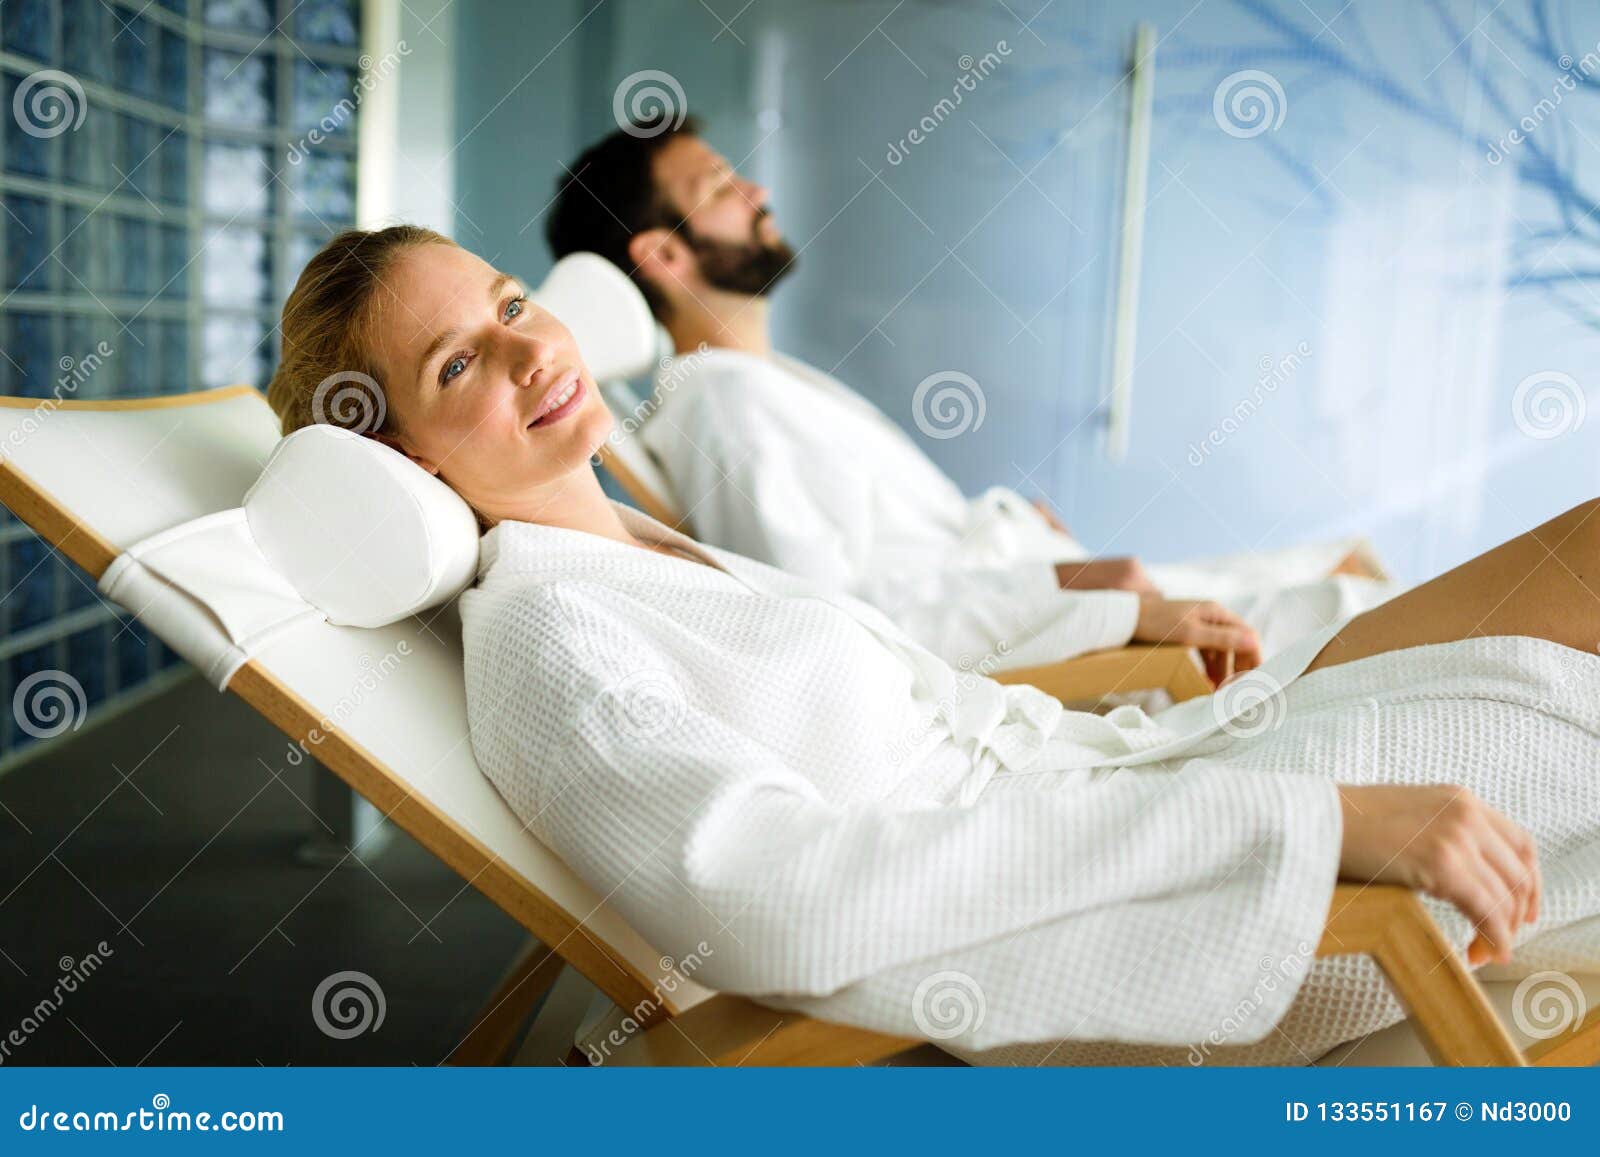 Attractive Happy Couple Relaxing In Spa Center Stock Image Image Of